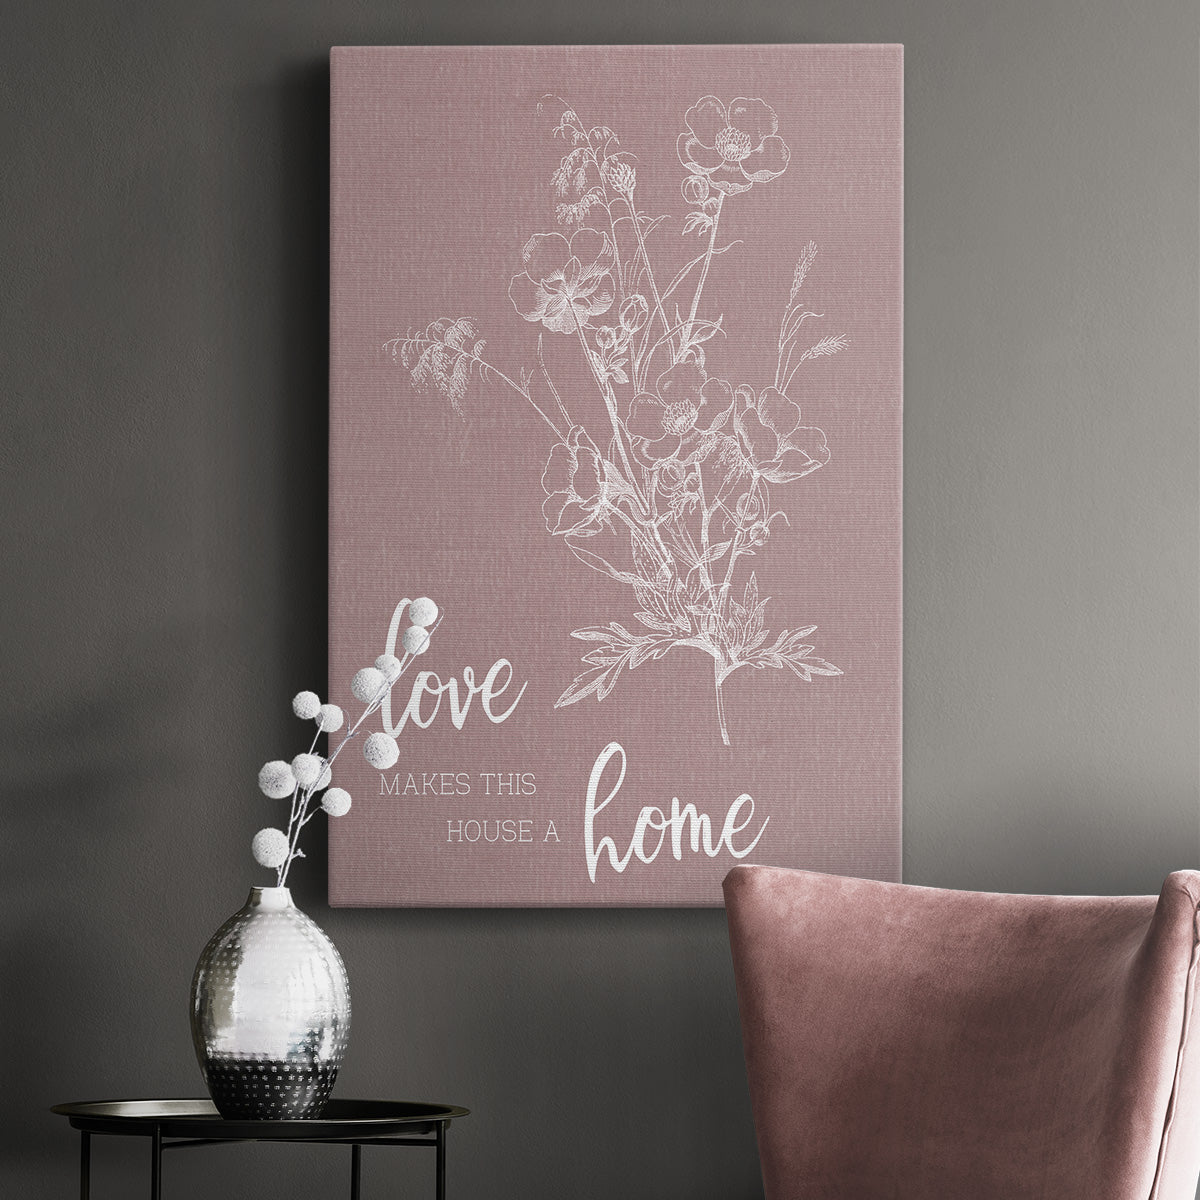 Love Home Premium Gallery Wrapped Canvas - Ready to Hang